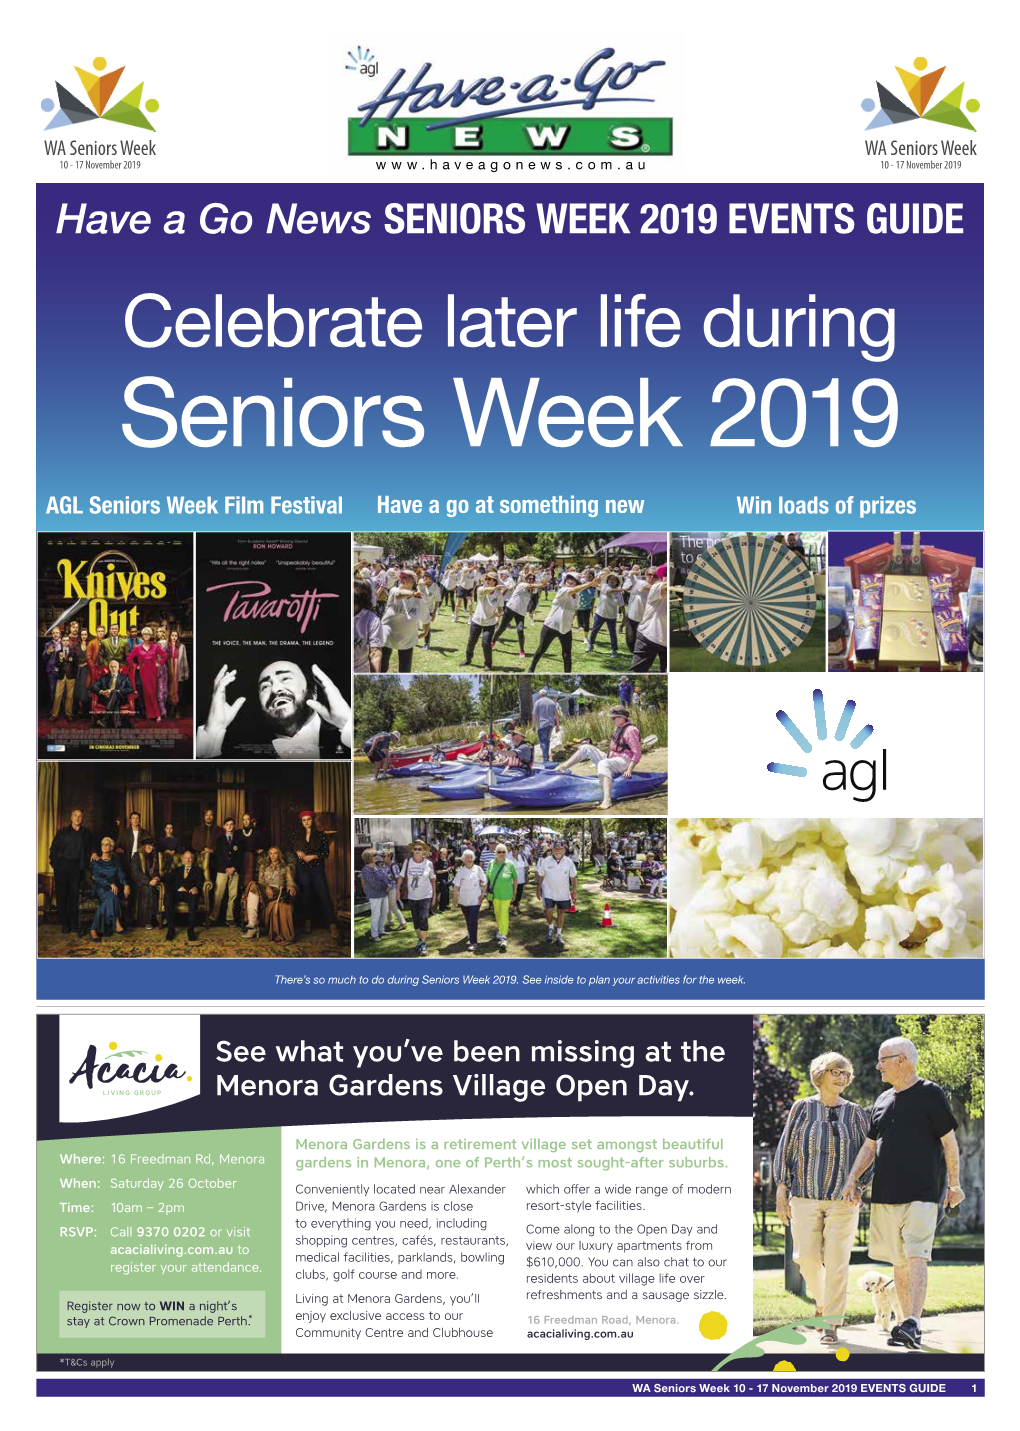 Celebrate Later Life During Seniors Week 2019 AGL Seniors Week Film Festival Have a Go at Something New Win Loads of Prizes